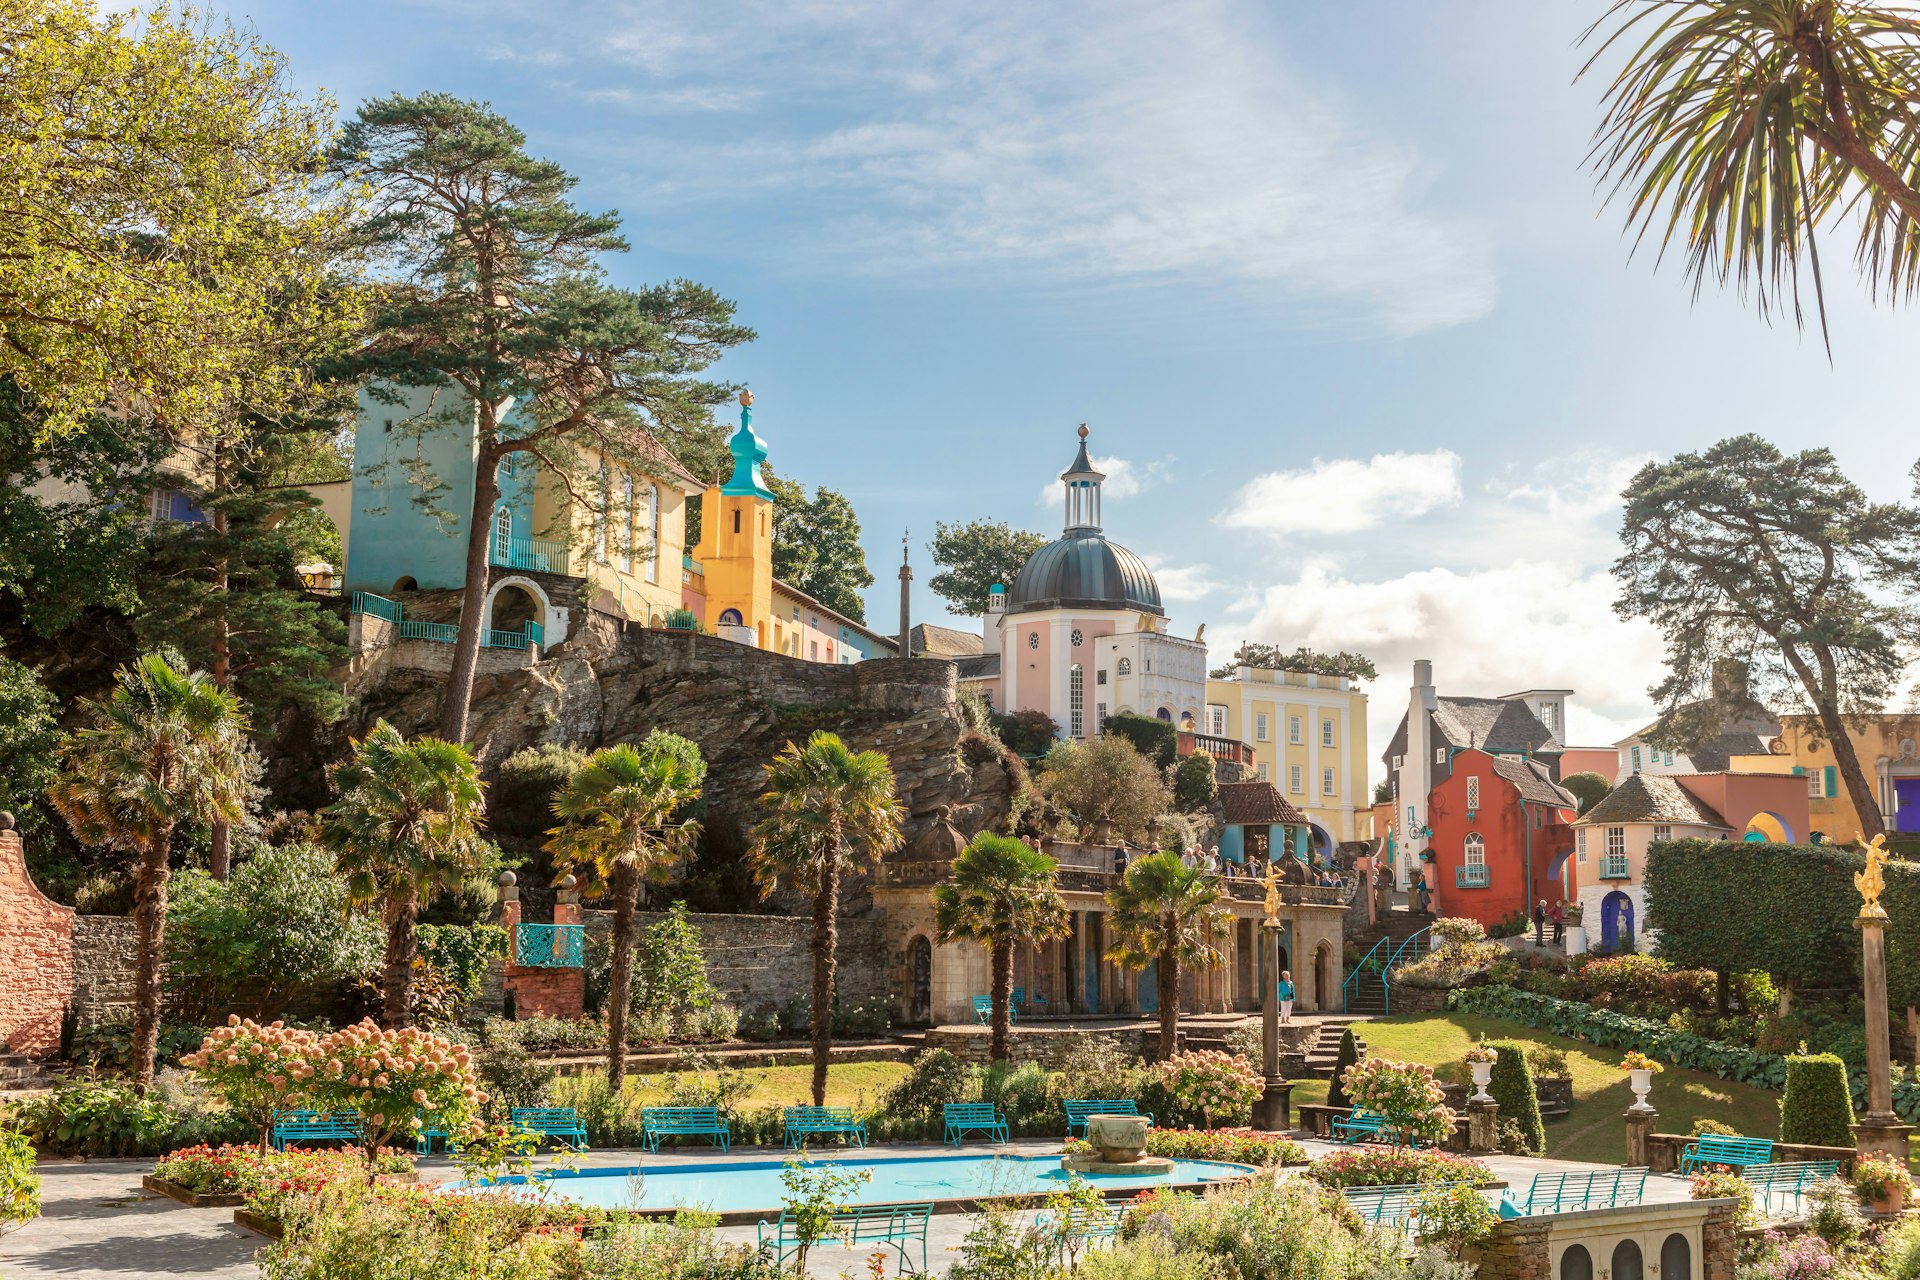 A park in Portmeirion; it has been planted with Mediterranean-style trees and plants, and it's surrounded by several elevated, brightly coloured buildings, giving the impression of an Italian hilltop town.